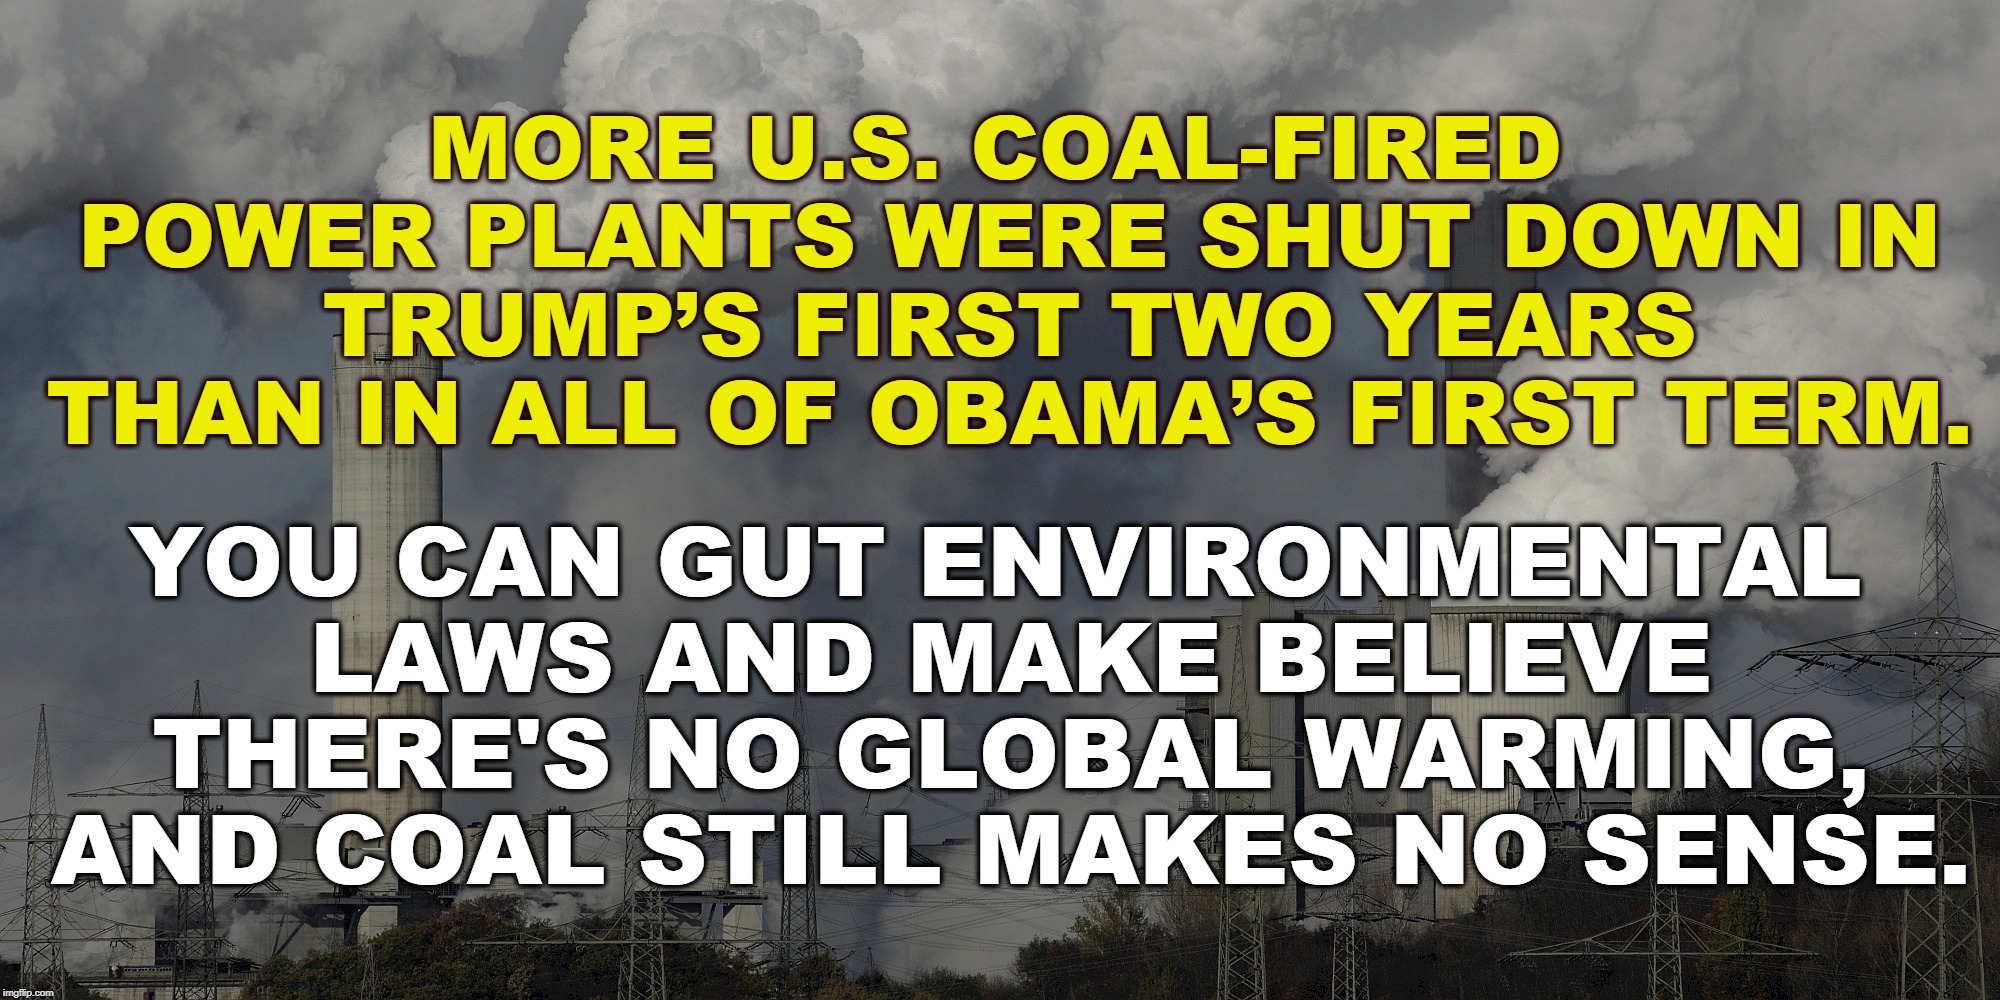 Trump's coal initiative was a total failure. | MORE U.S. COAL-FIRED POWER PLANTS WERE SHUT DOWN IN TRUMP’S FIRST TWO YEARS THAN IN ALL OF OBAMA’S FIRST TERM. YOU CAN GUT ENVIRONMENTAL LAWS AND MAKE BELIEVE THERE'S NO GLOBAL WARMING, AND COAL STILL MAKES NO SENSE. | image tagged in trump,obama,coal,energy,power plants | made w/ Imgflip meme maker